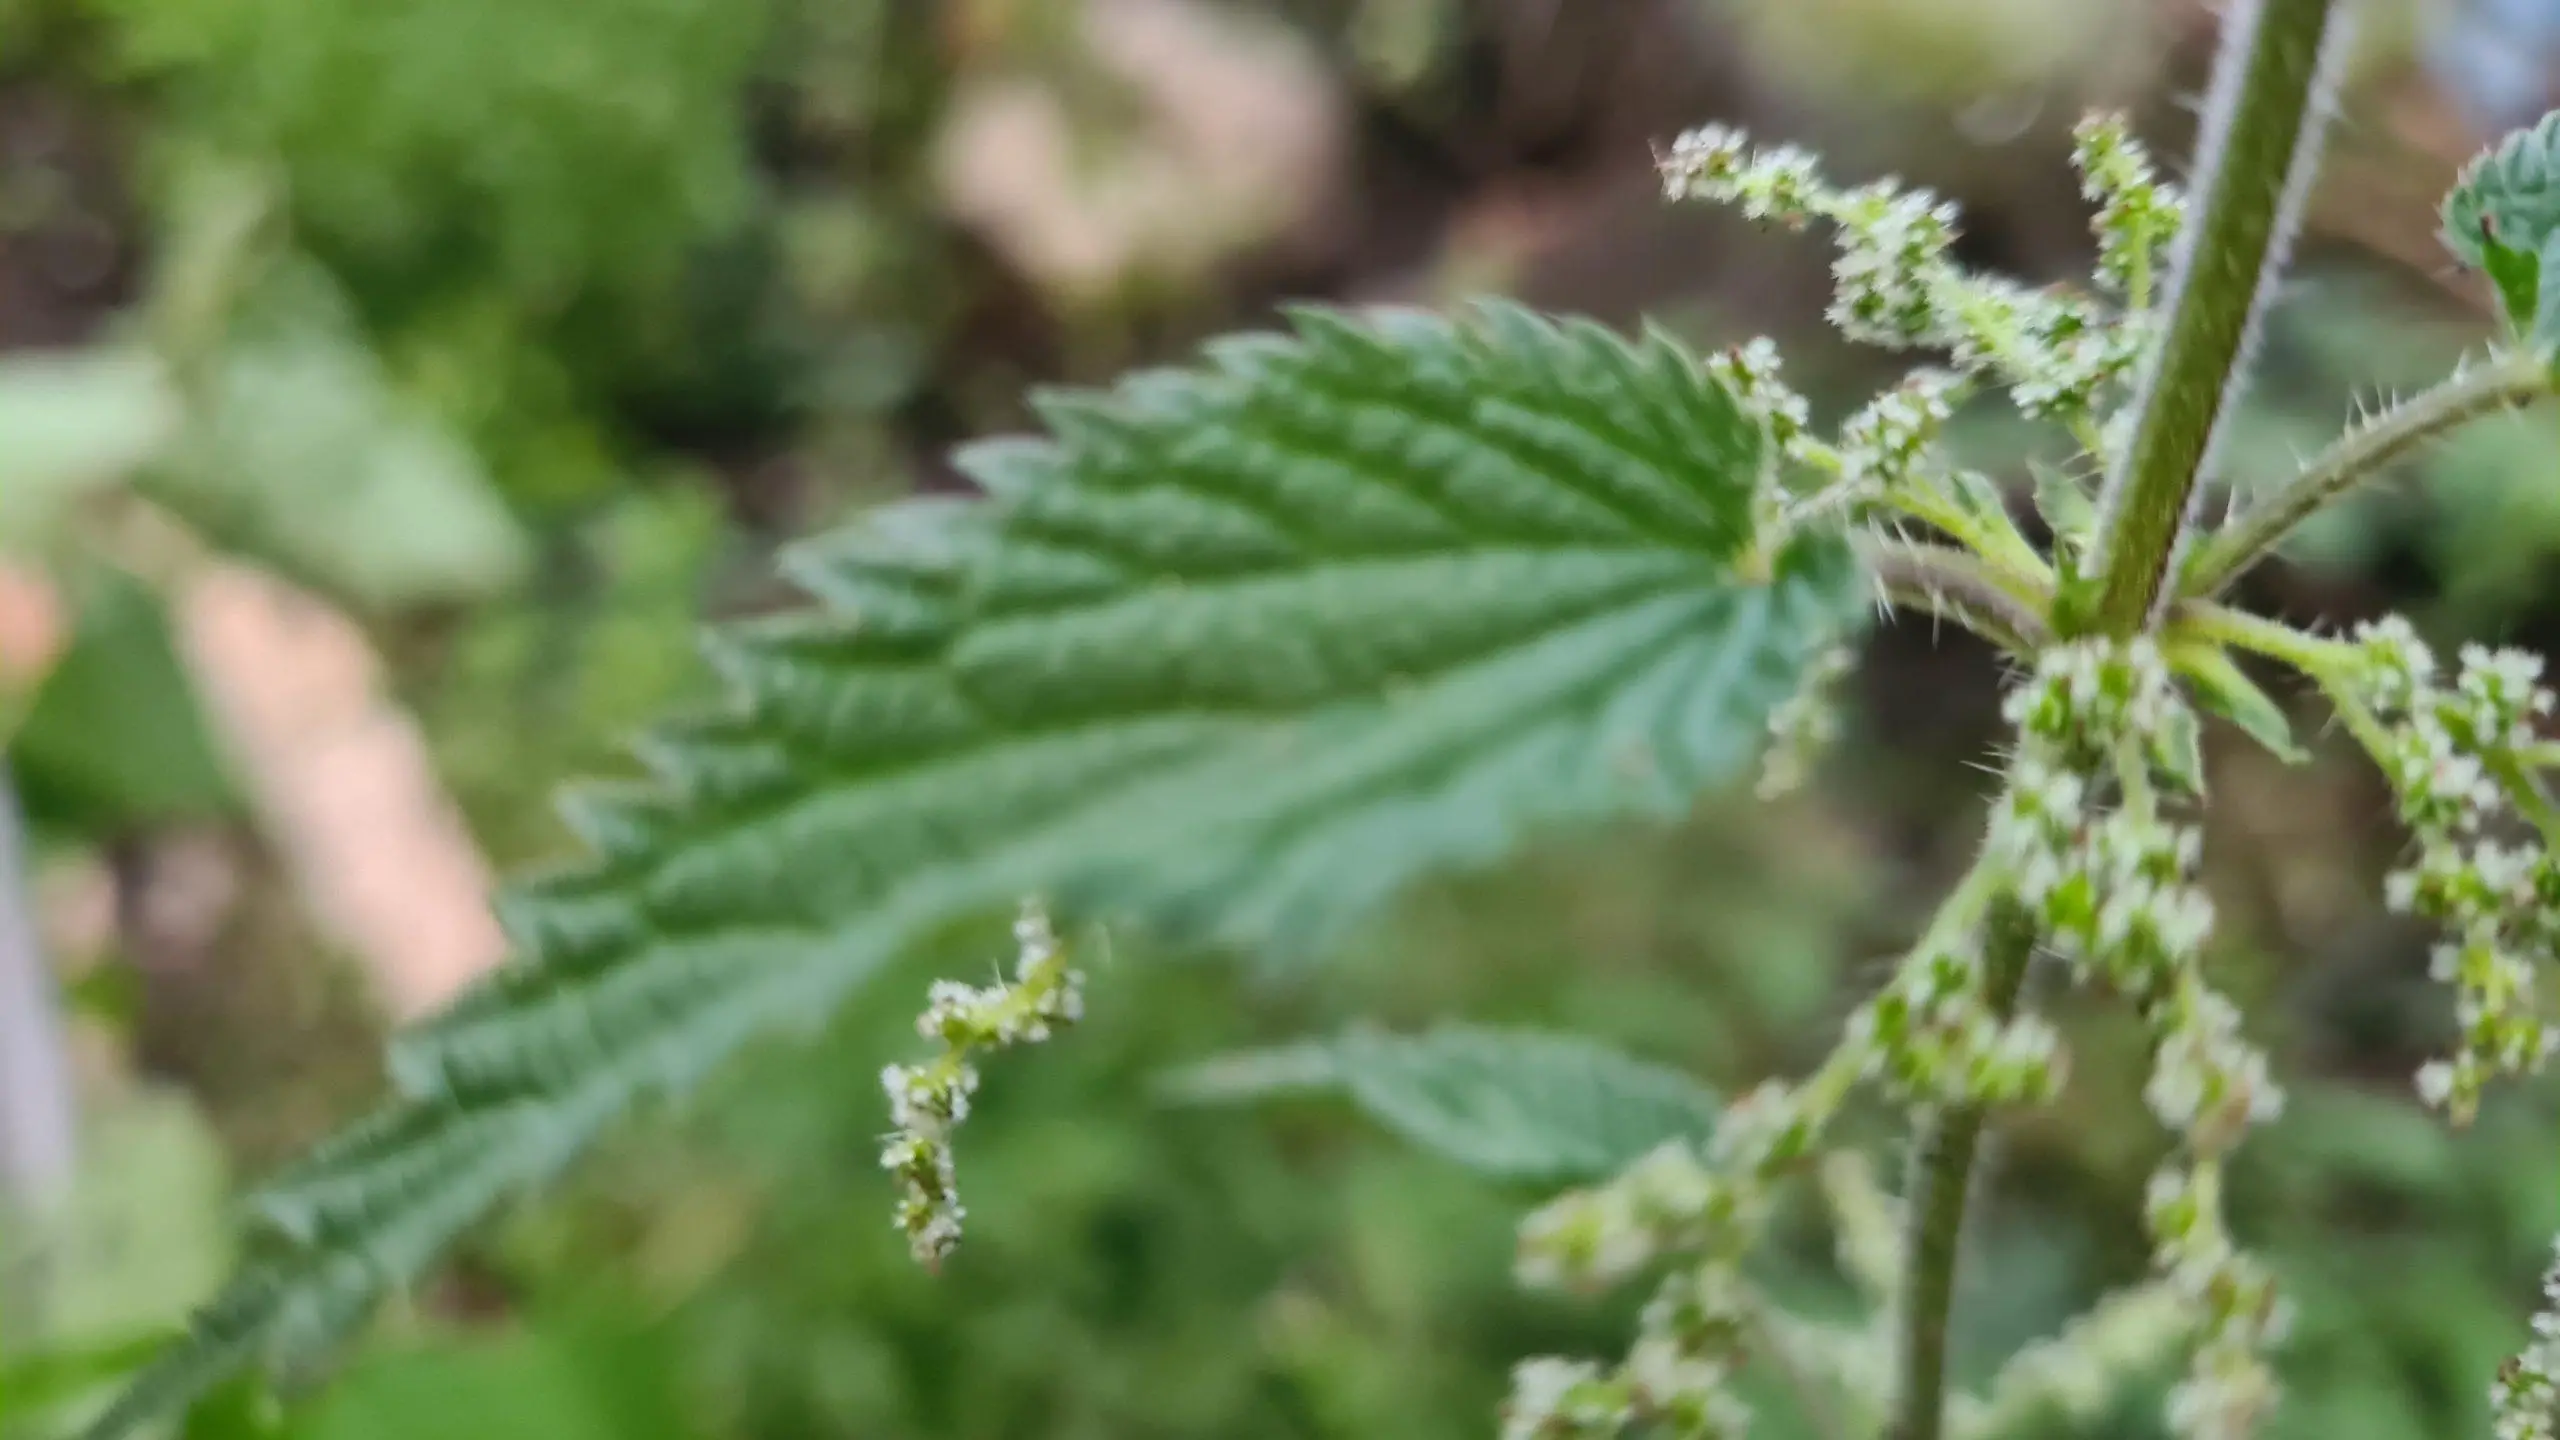 The spiky-haired stem of the nettle plant - Get Rid of Stinging Nettles